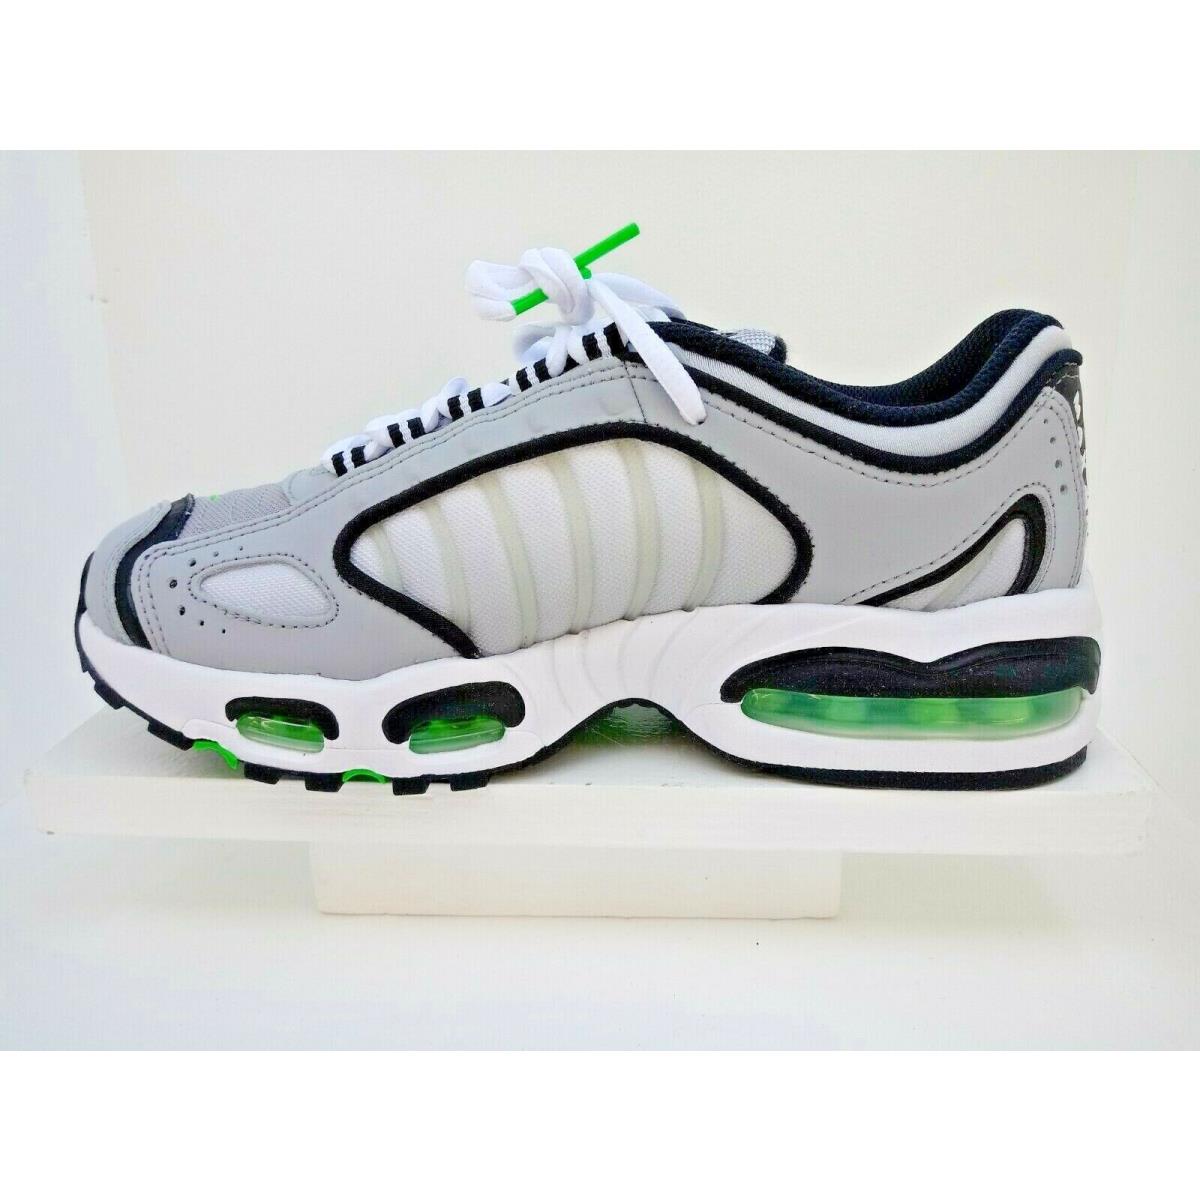 Nike shoes  - Wolf Grey/Black-Green Spark-White 7